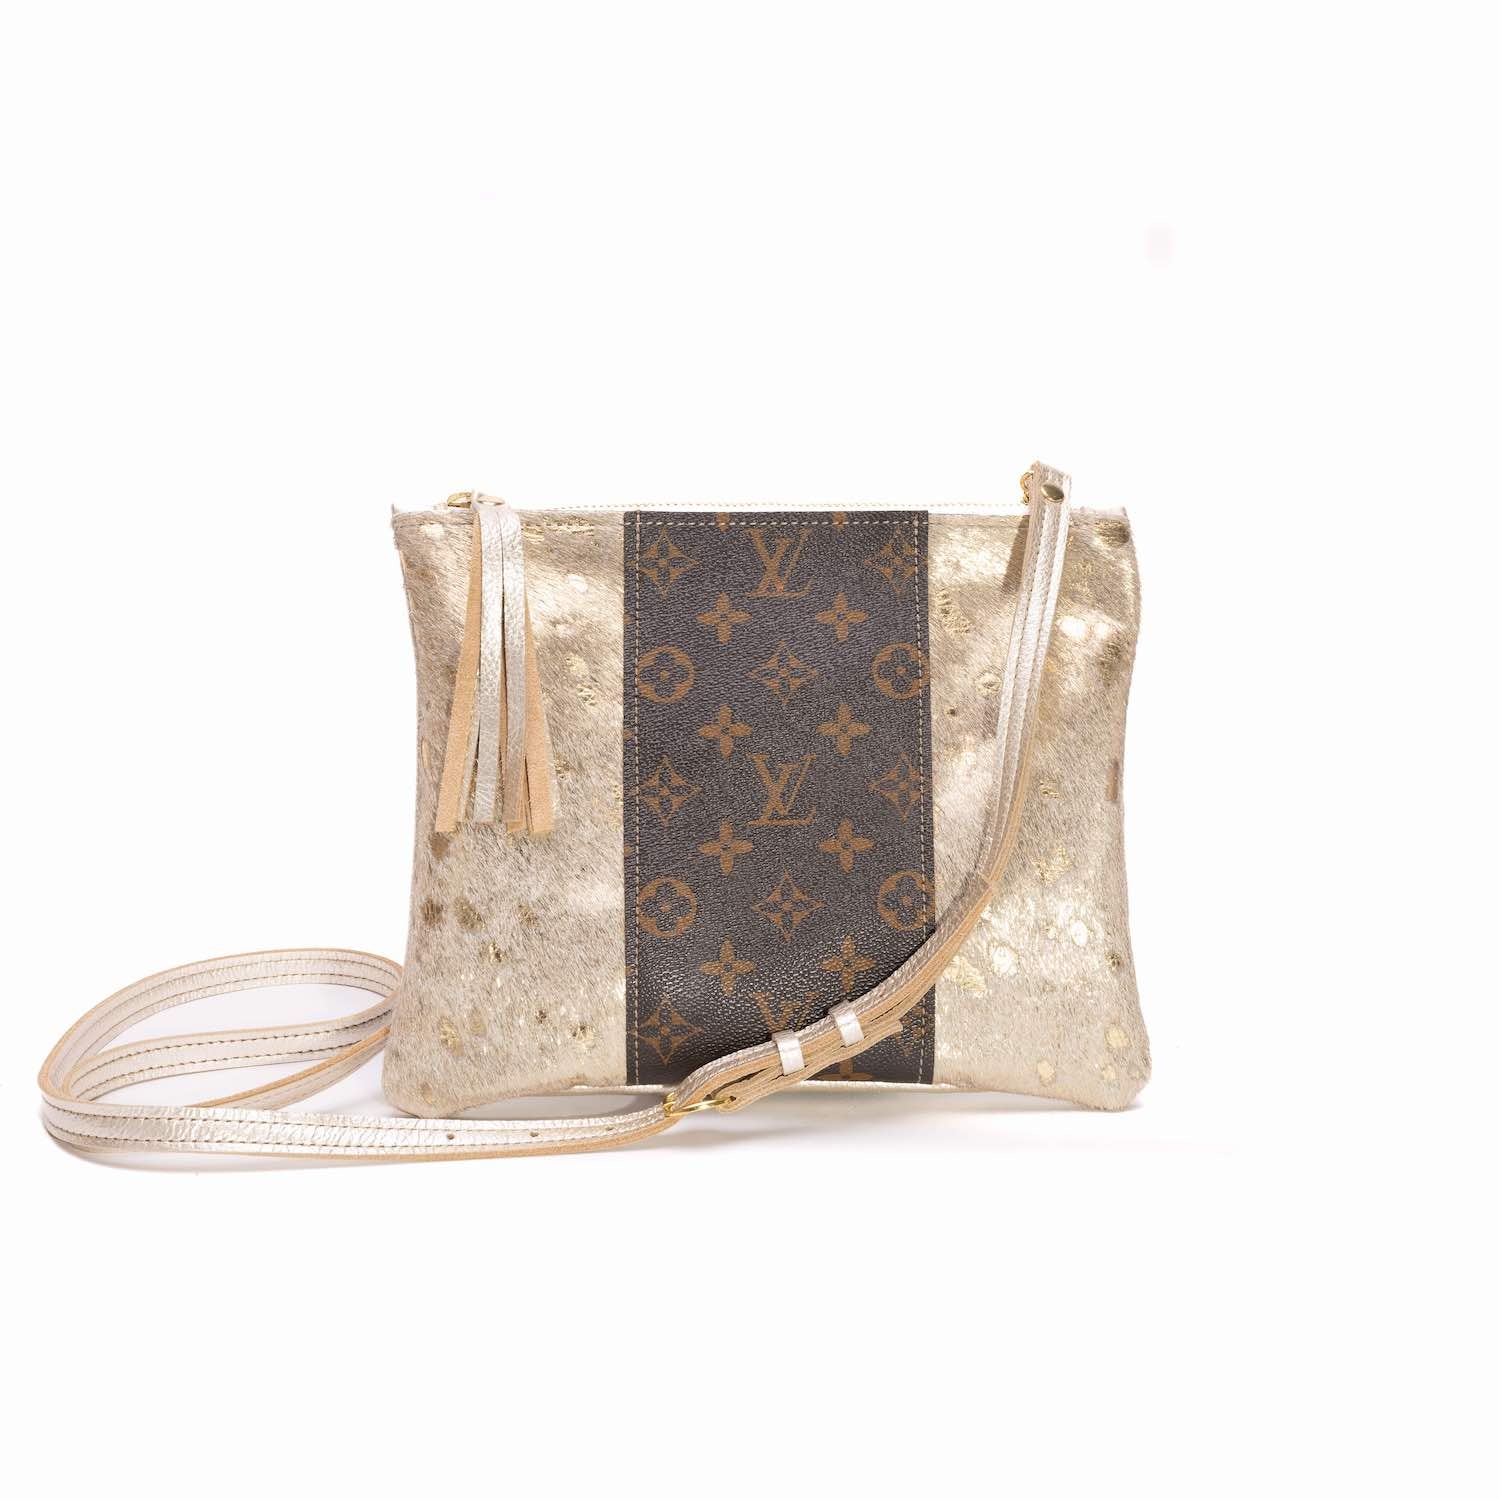 upcycled louis vuitton clear bag